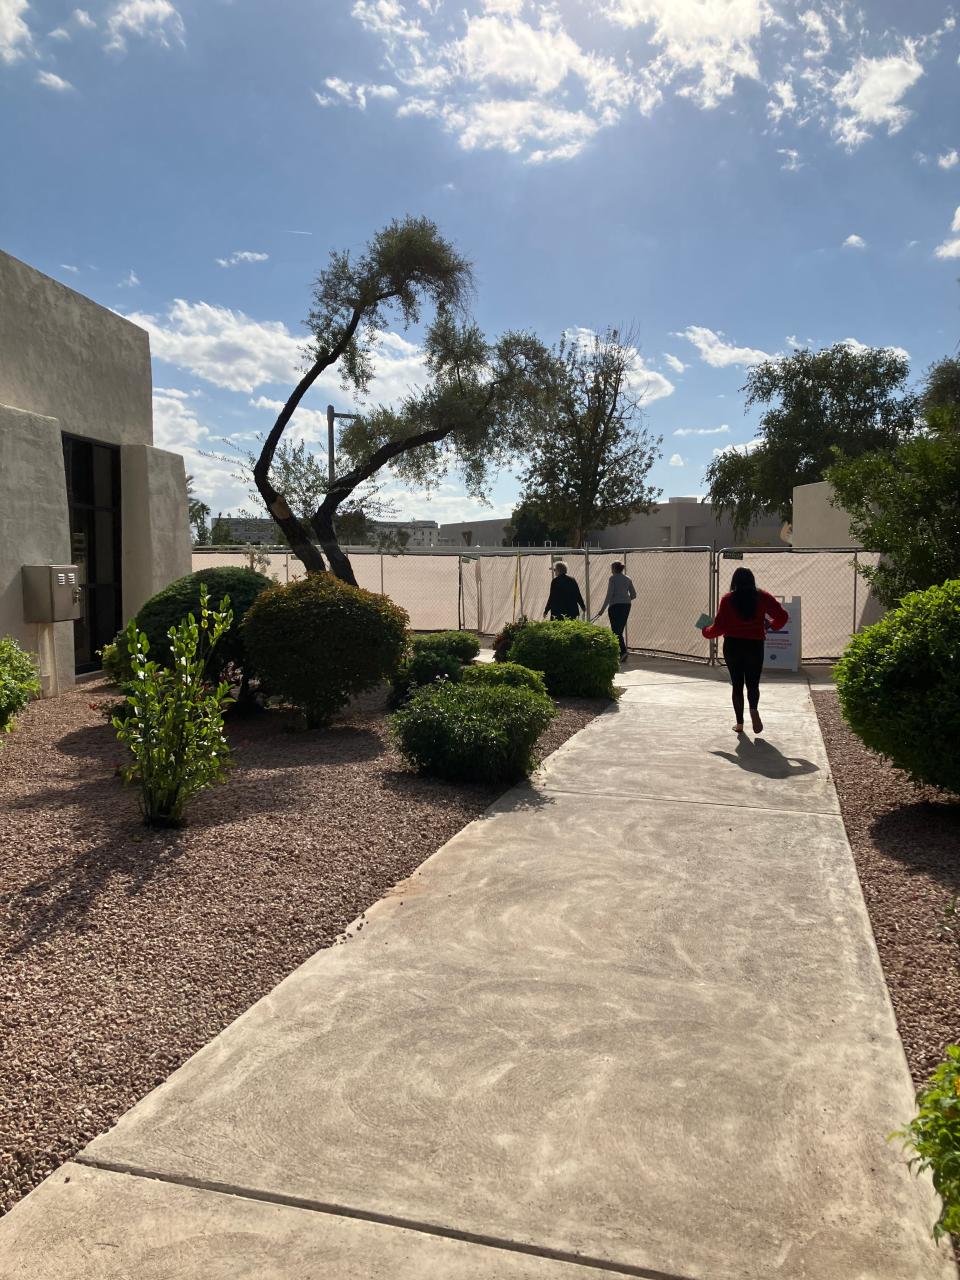 Voters walk to drop off their ballots at Scottsdale City Hall on Nov. 2, 2022.